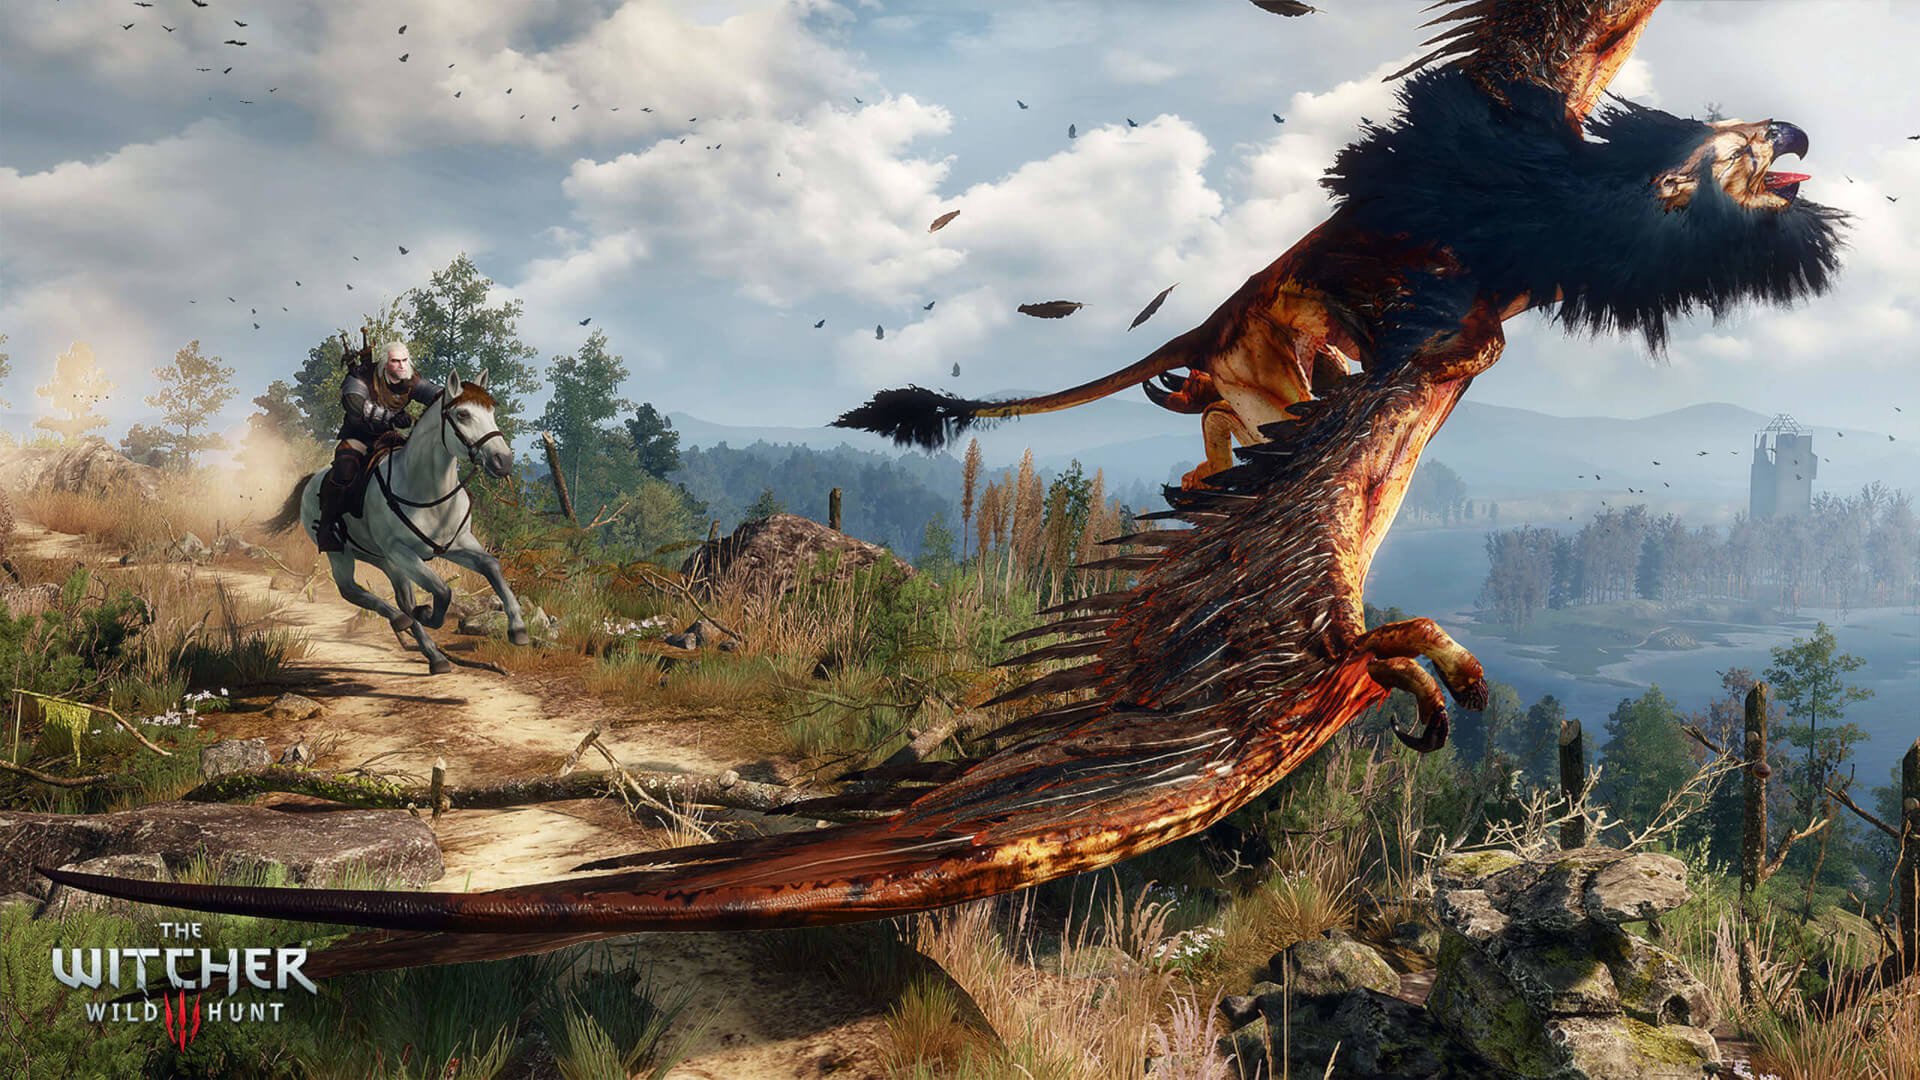 Geralt riding atop Roach and battling a gryphon in The Witcher 3